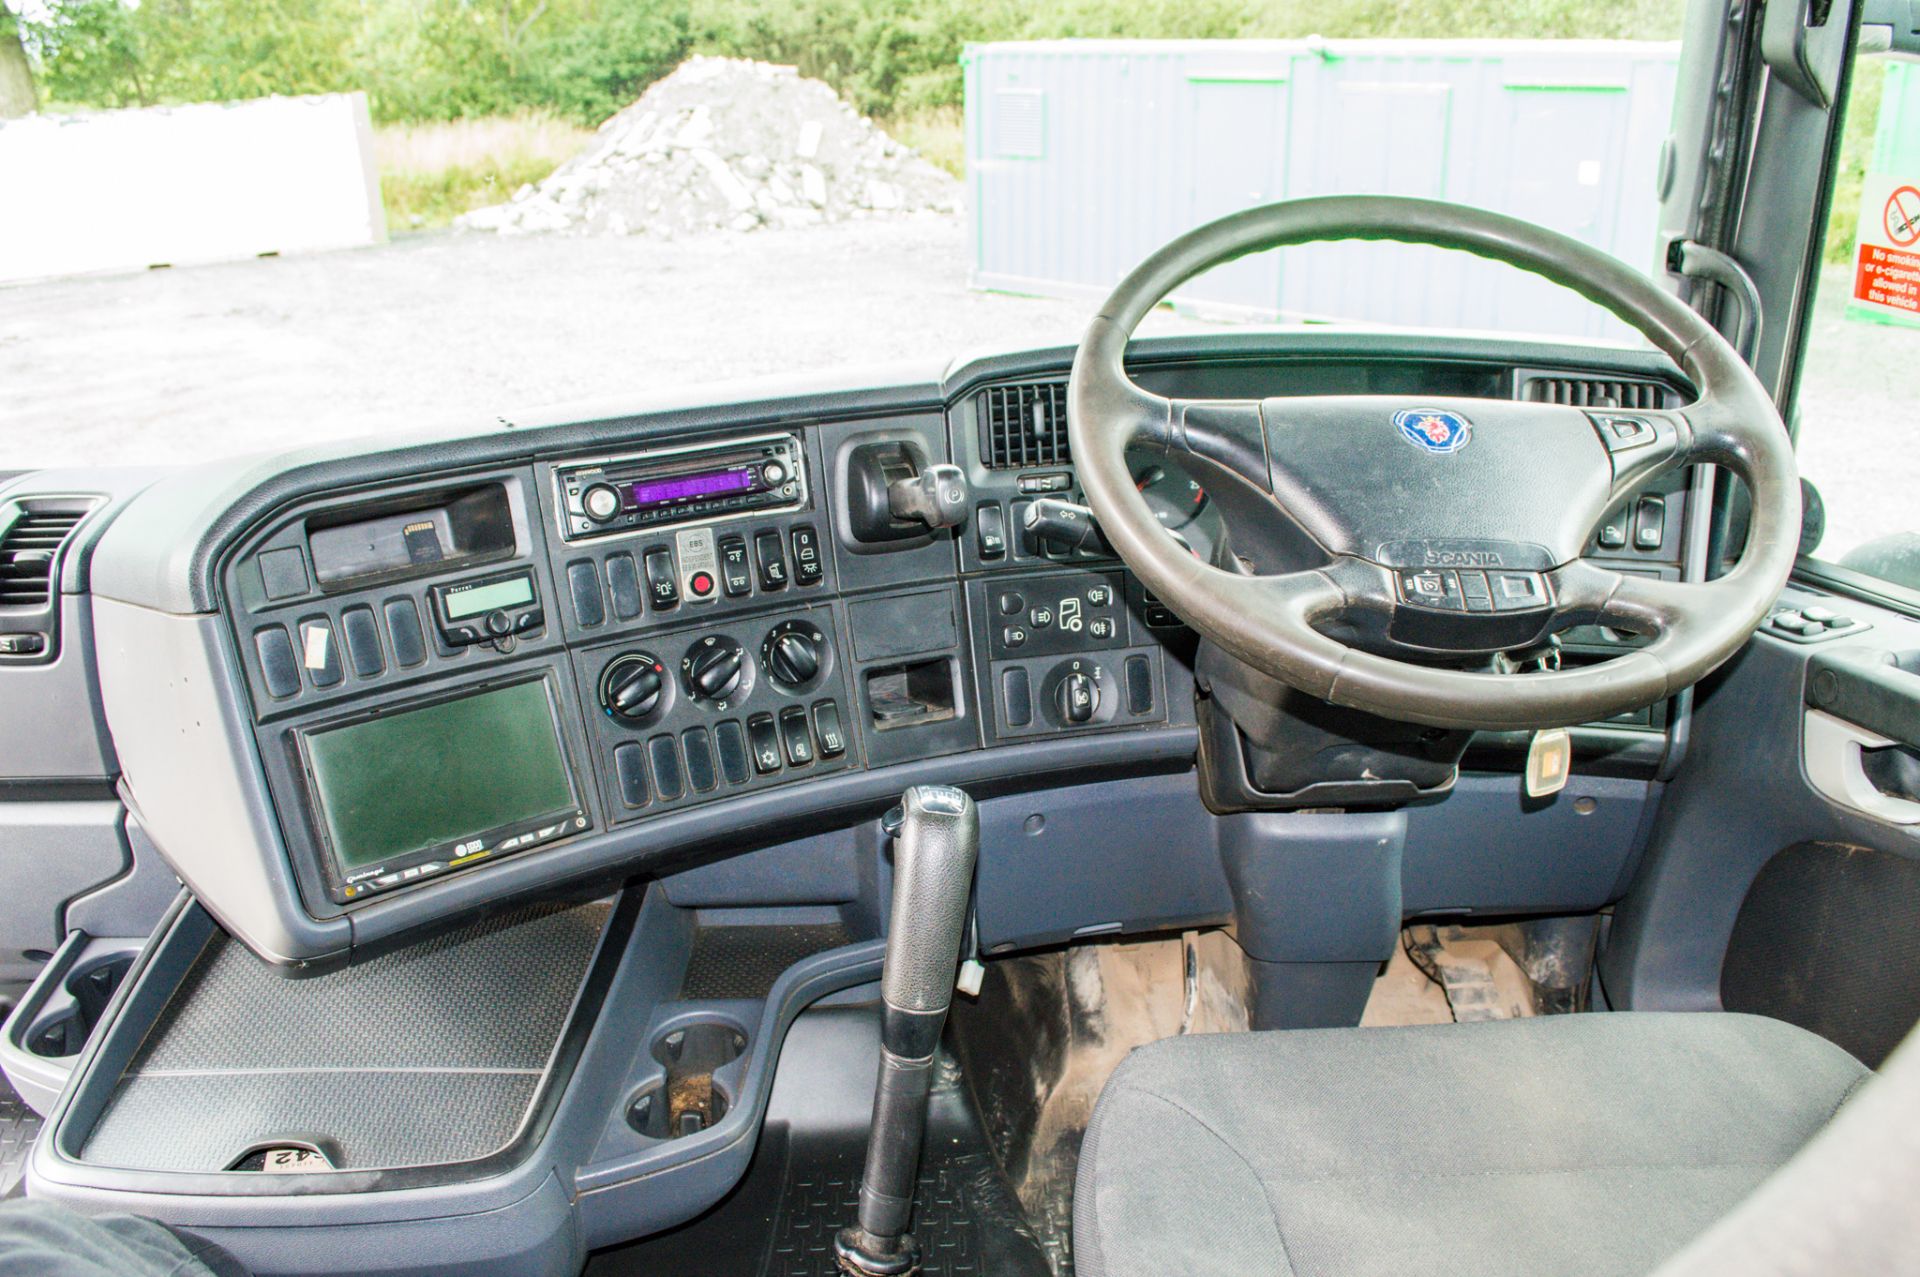 Scania R440 SRS manual 6 wheel beaver tail plant lorry - Image 22 of 23